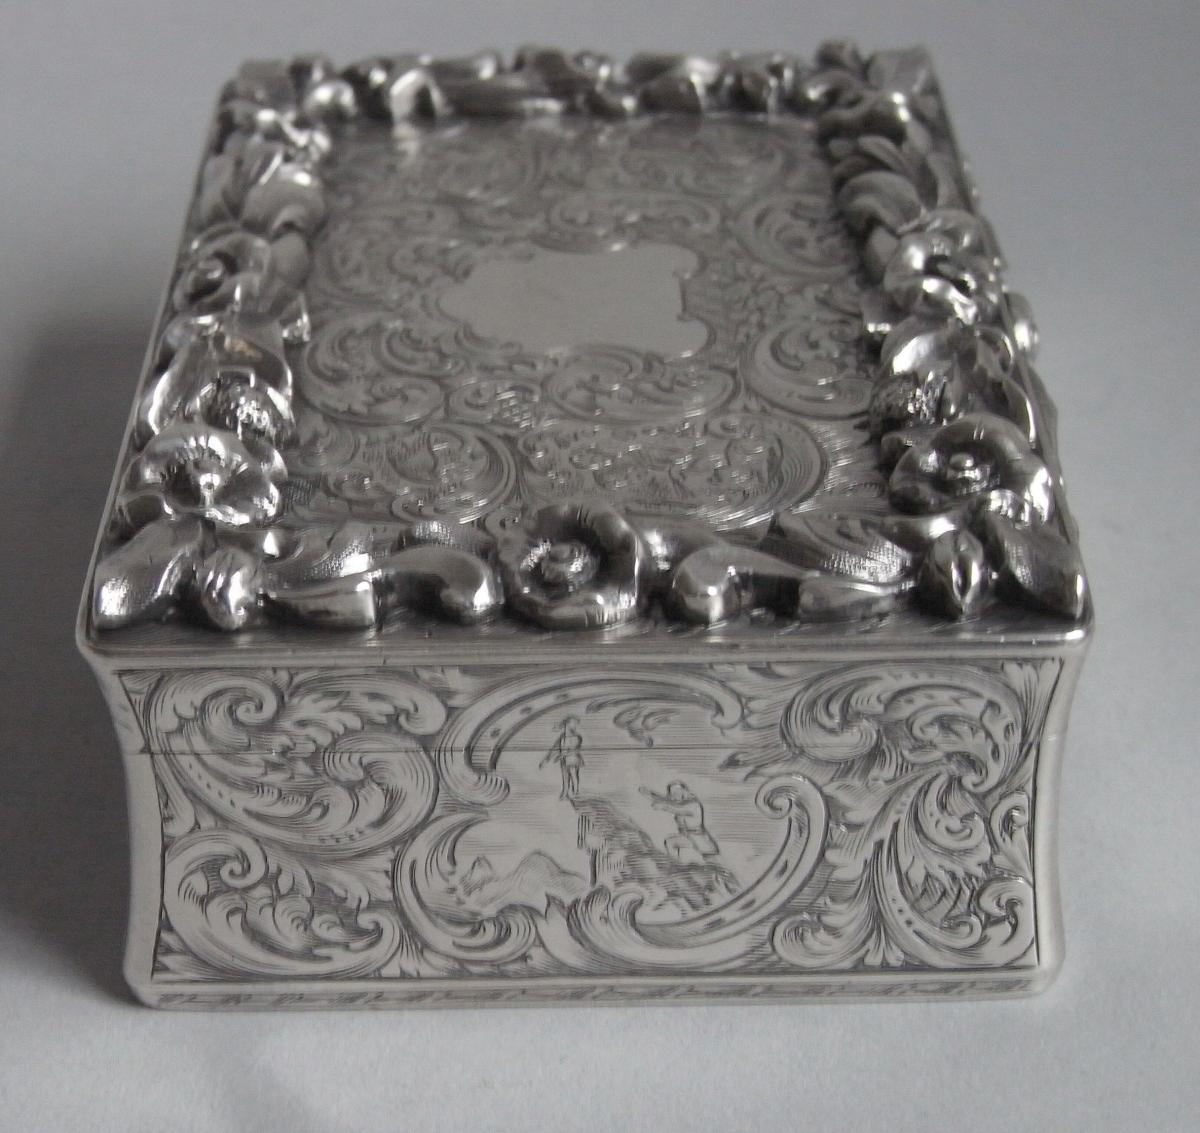 An exceptionally fine & rare Table Snuff Box made in London in 1845 by Rawlings & Summers